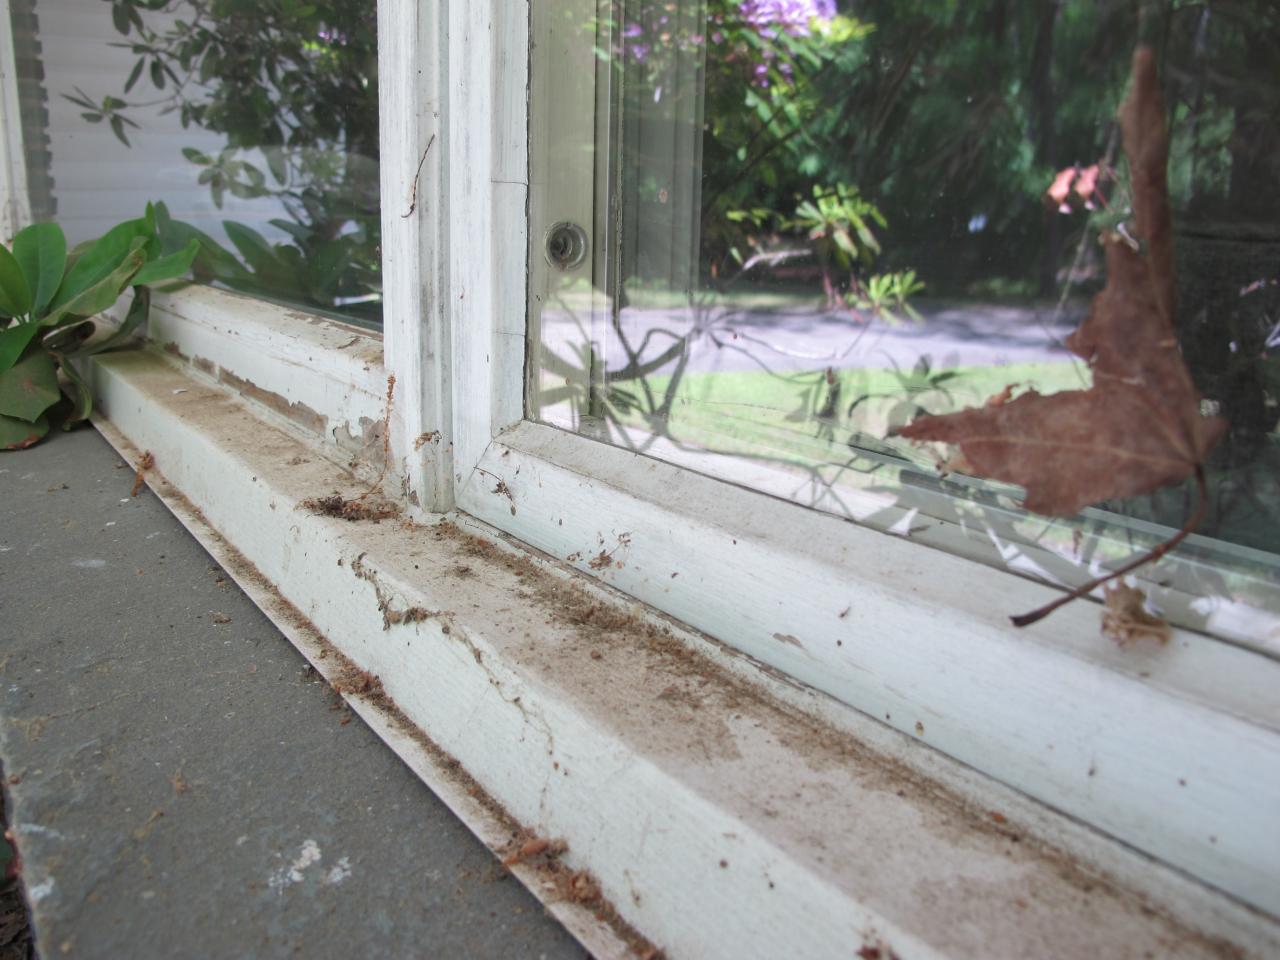 How to Pressure Wash Windows | how-tos | DIY